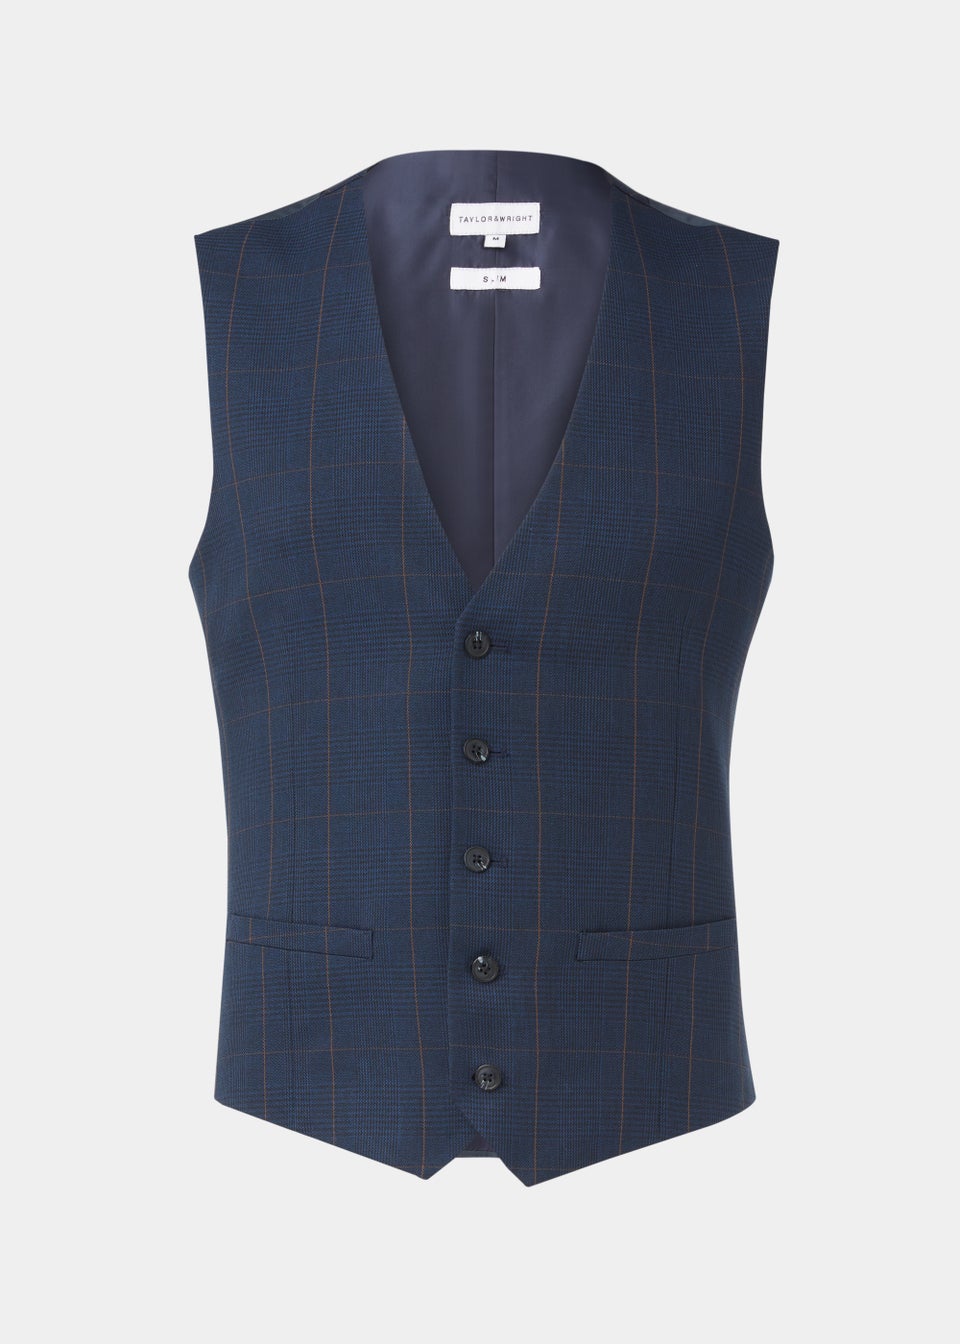 Taylor & Wright Westminster Navy Suit Waistcoat